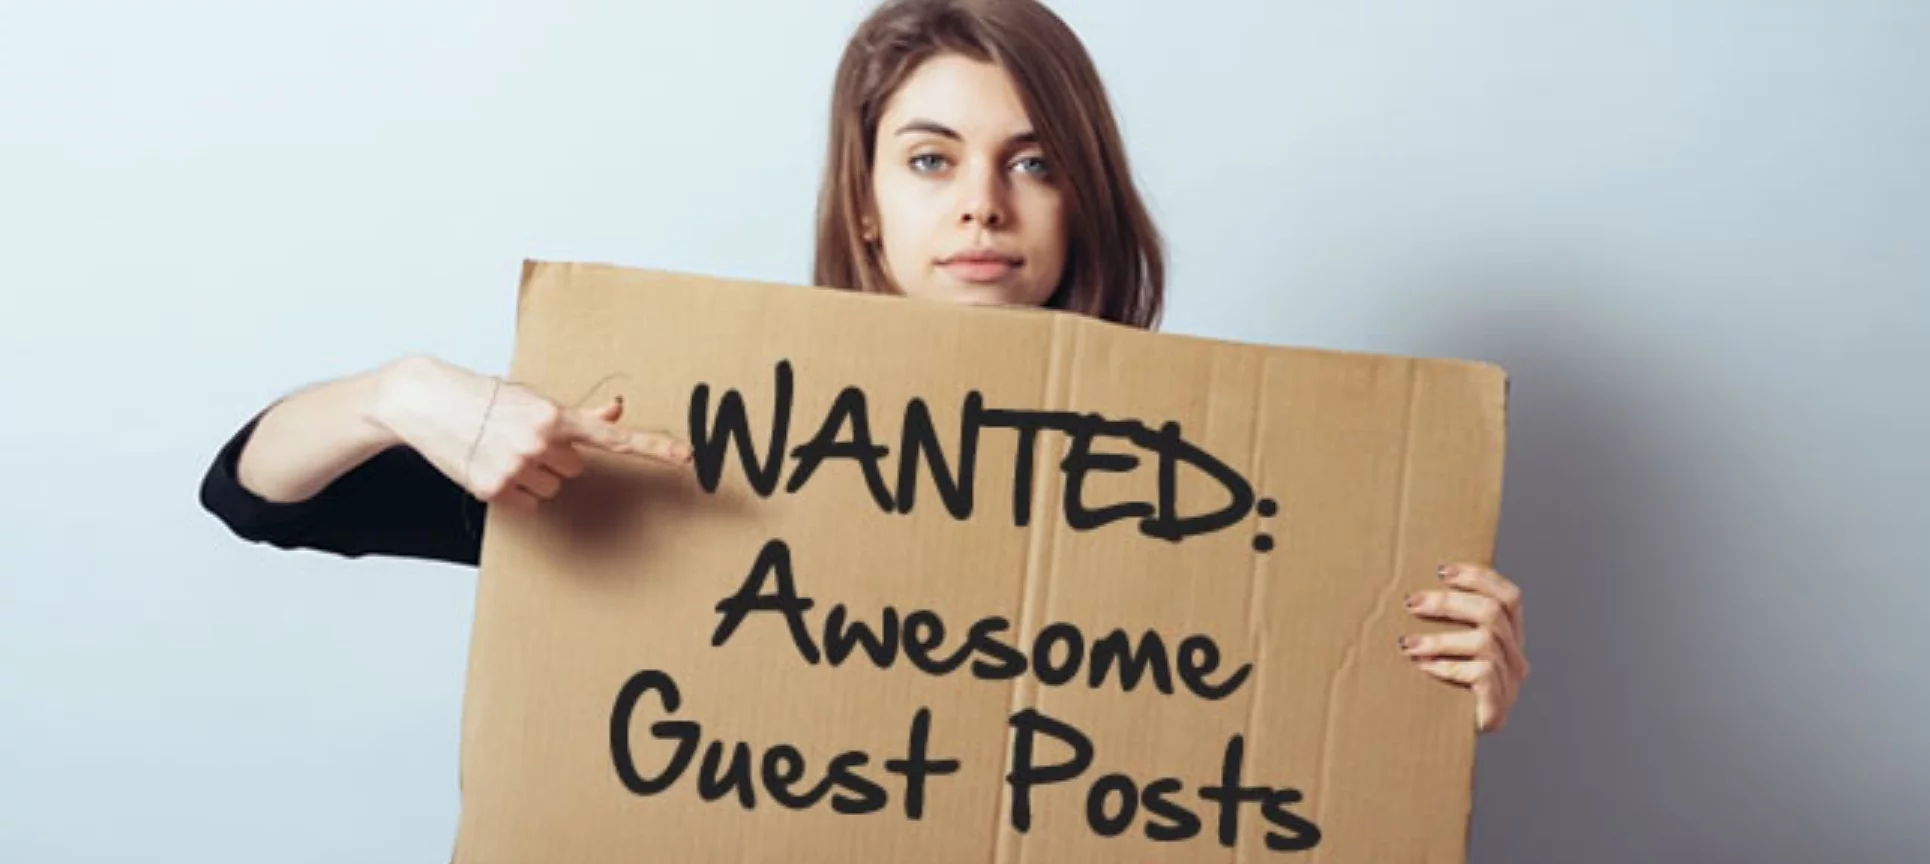 wanted awesome guest post